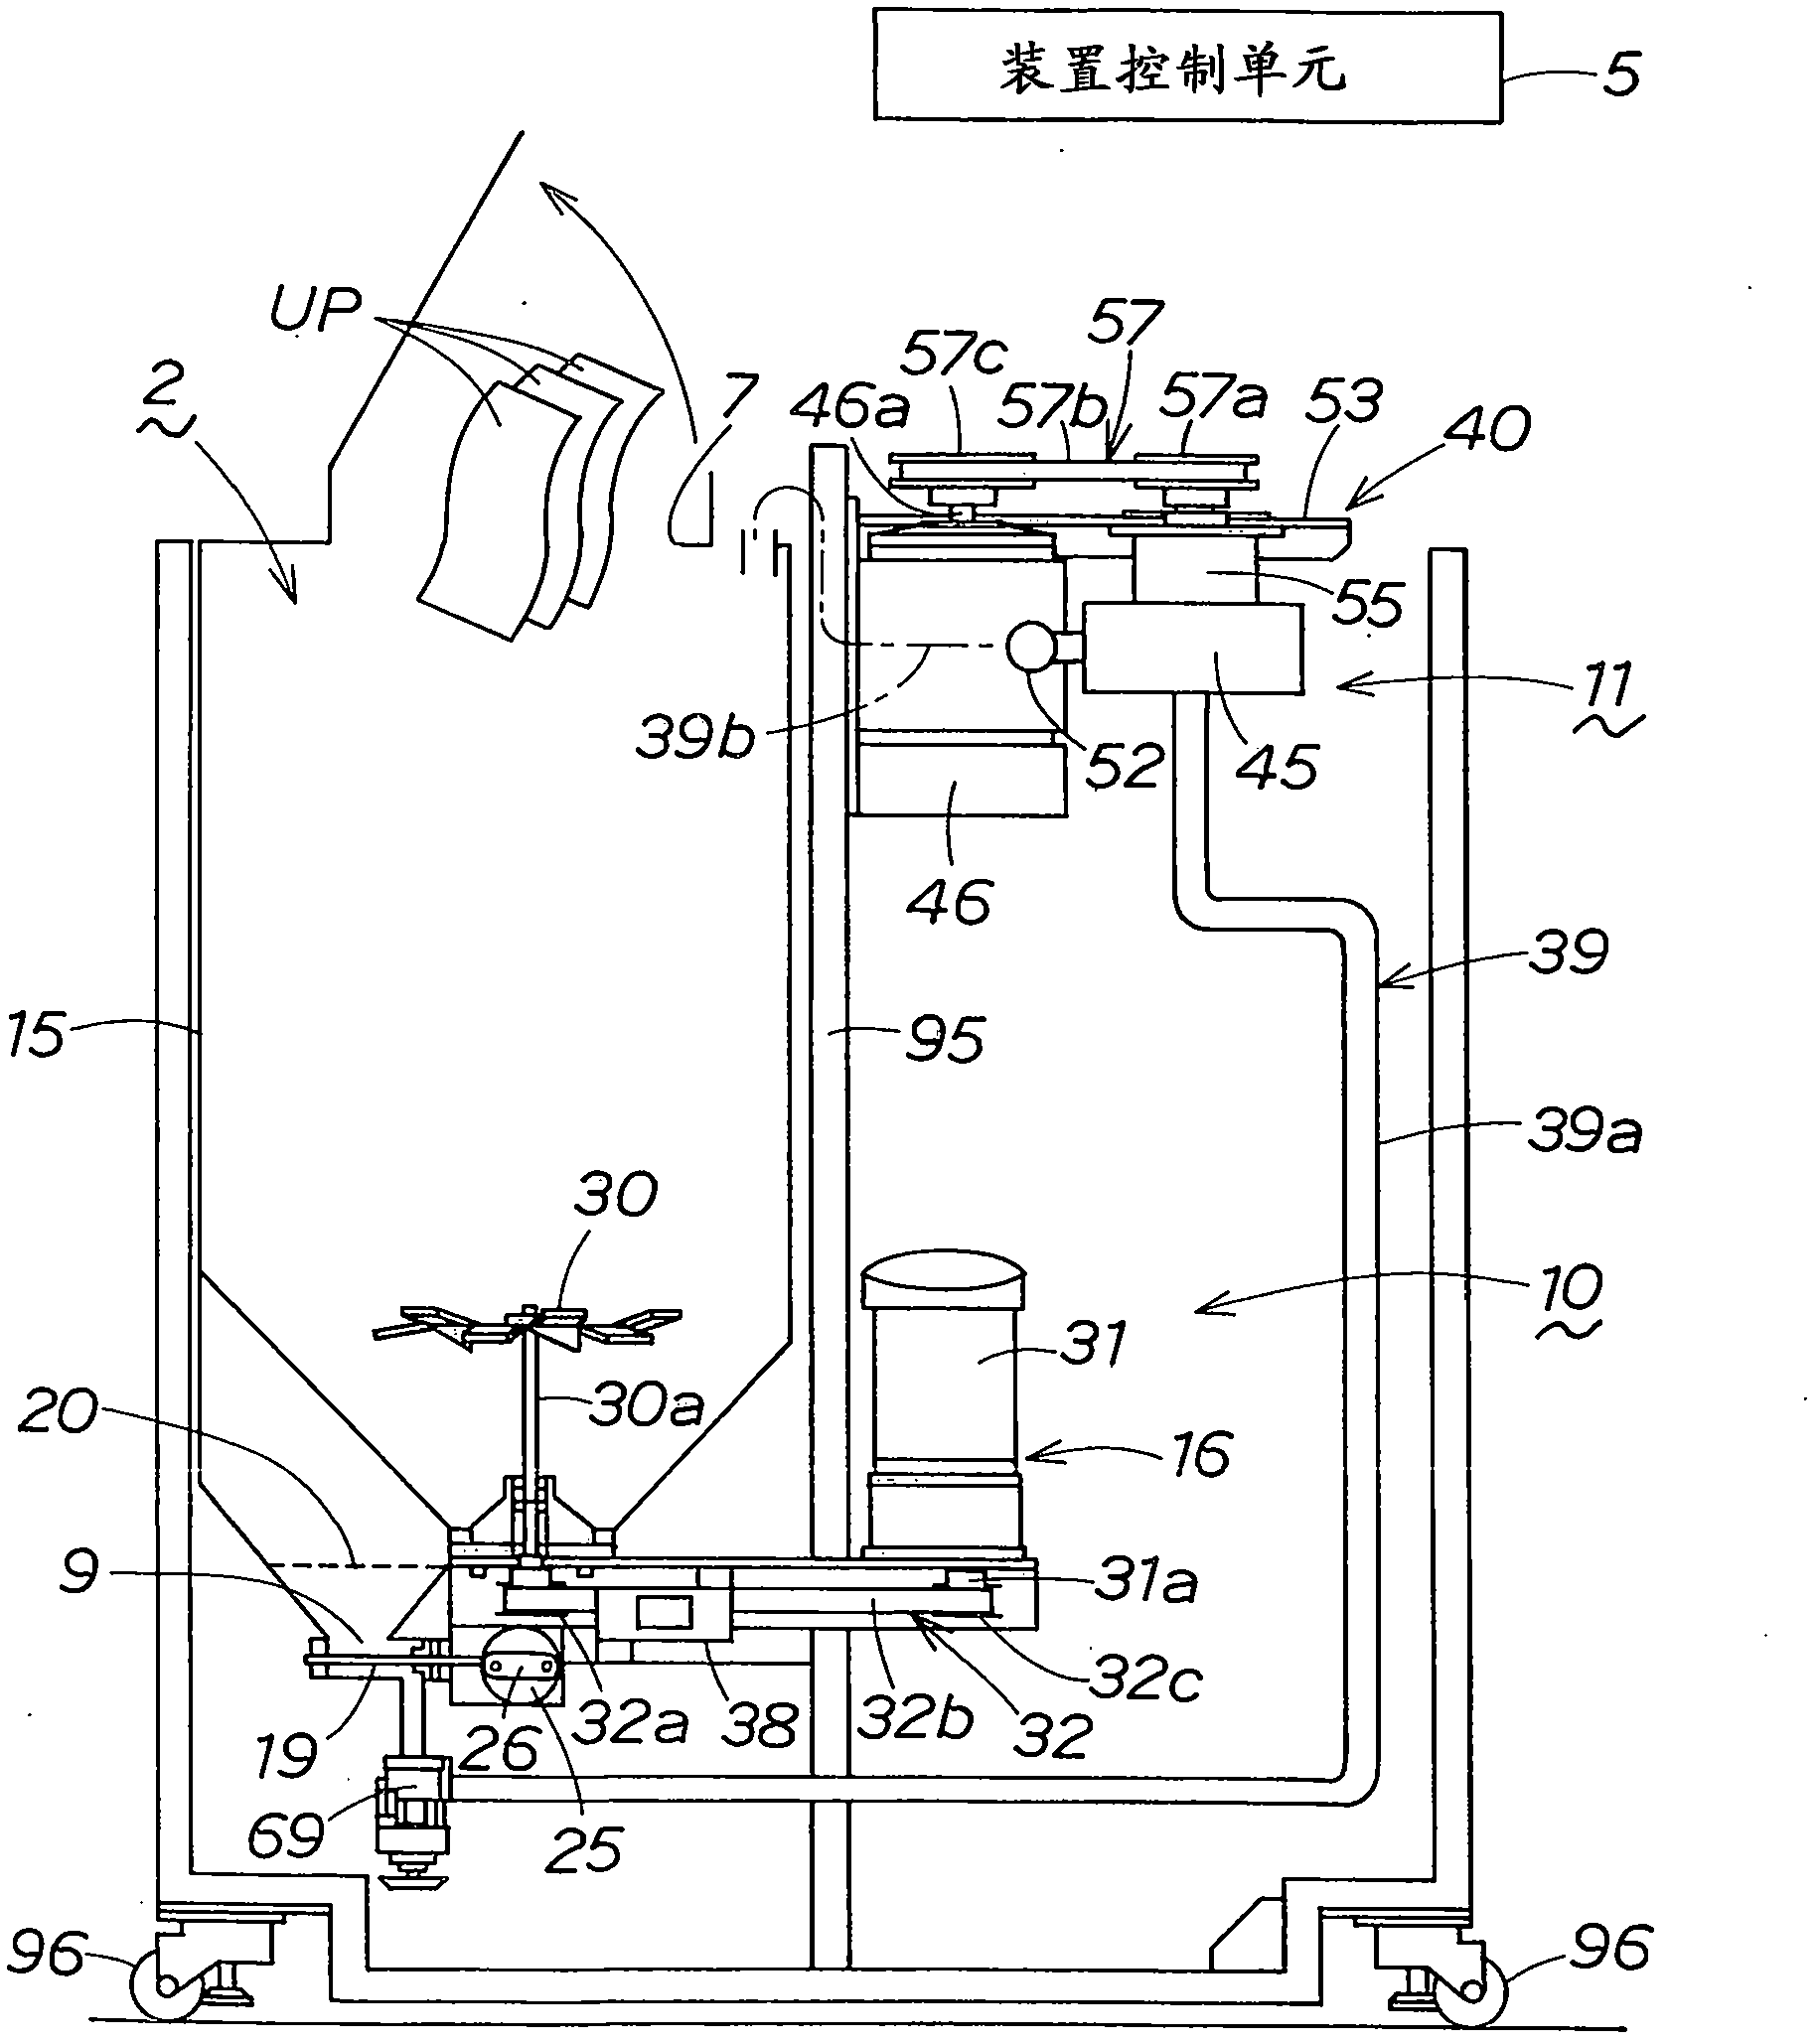 Pulp making device of used paper recycling apparatus and used paper recycling apparatus